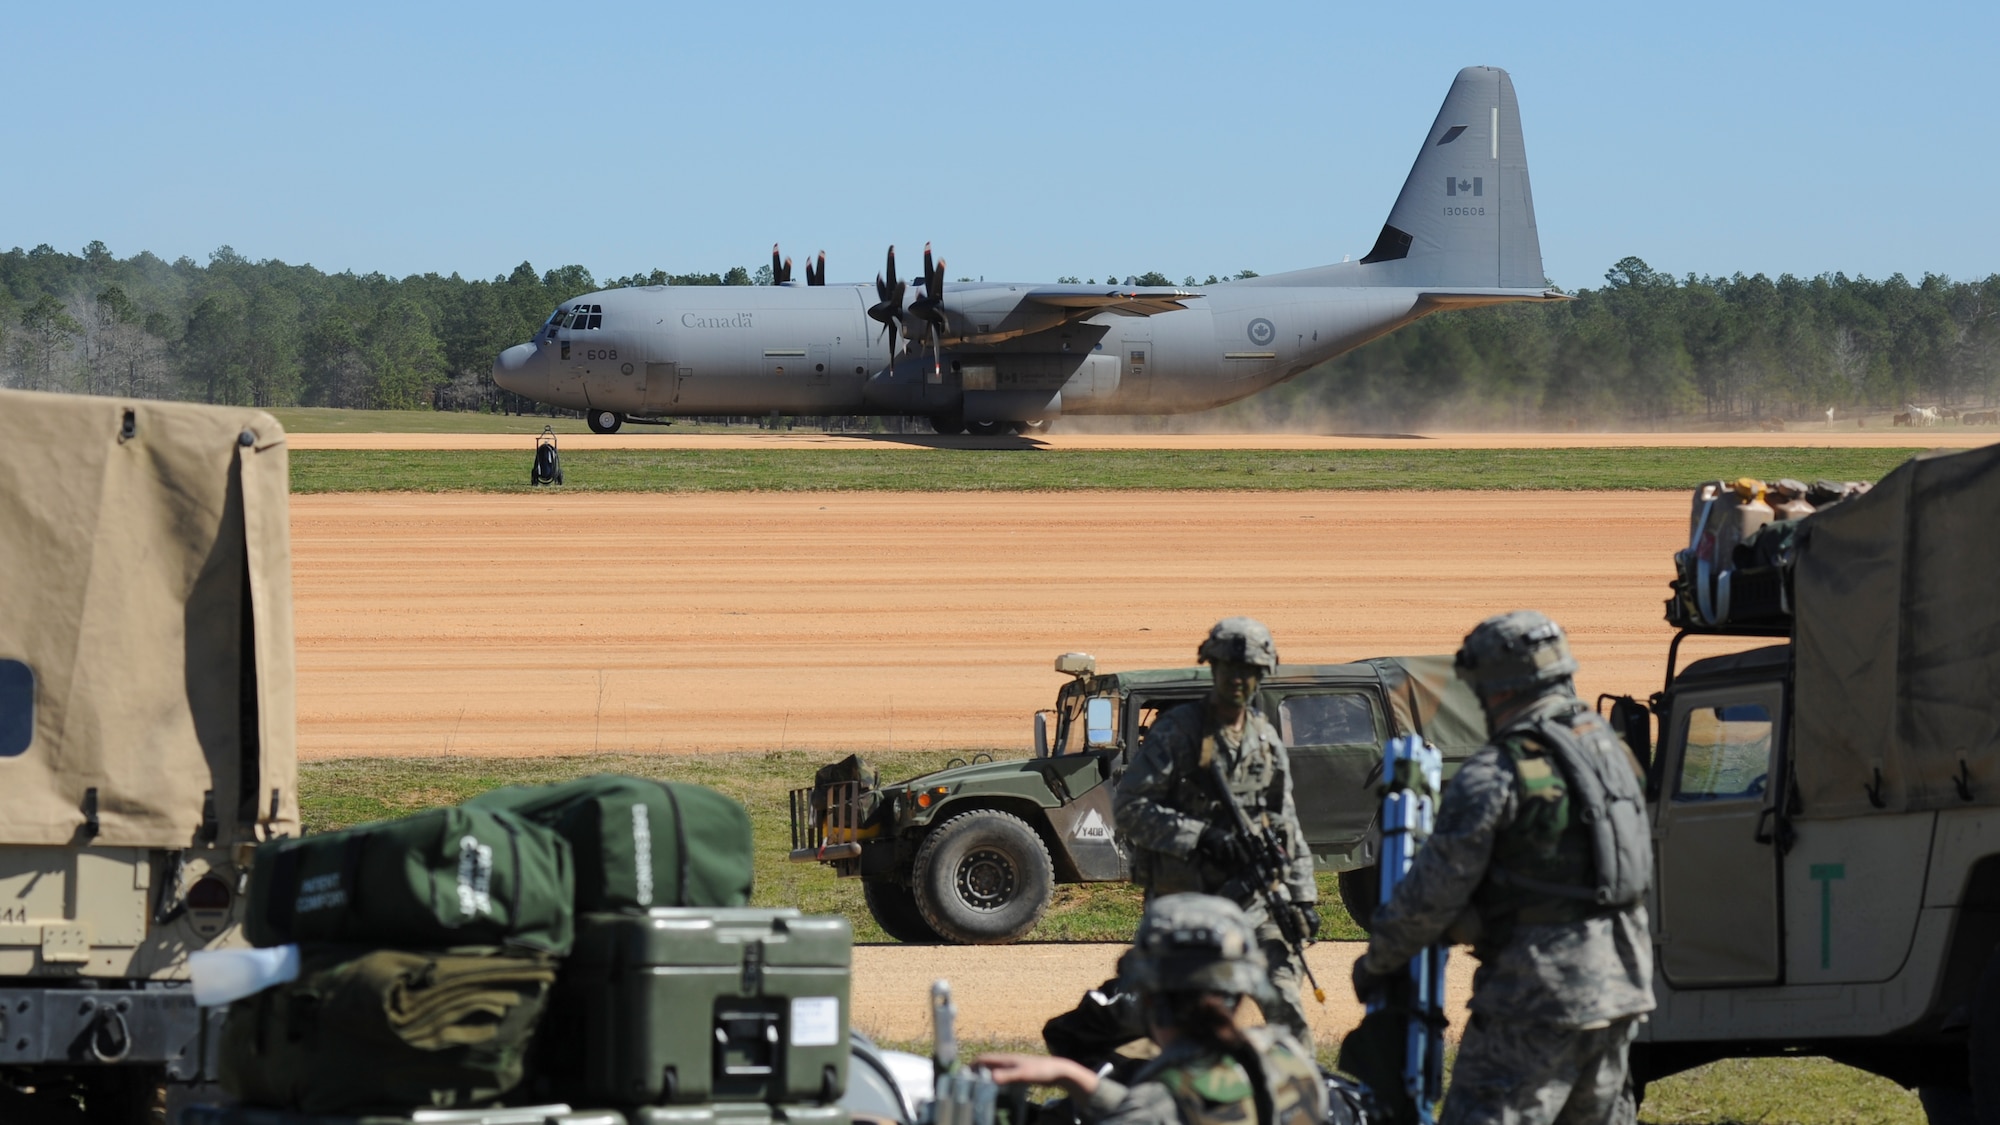 A Royal Canadian Air Force C-130J lands at the Geronimo Landing Zone during GREEN FLAG 16-04 on Fort Polk, La., Feb. 17, 2016. U.S. forces routinely work with NATO partners during Green Flag exercises at the Joint Readiness Training Center. (U.S. Air Force photo/Senior Airman Harry Brexel)